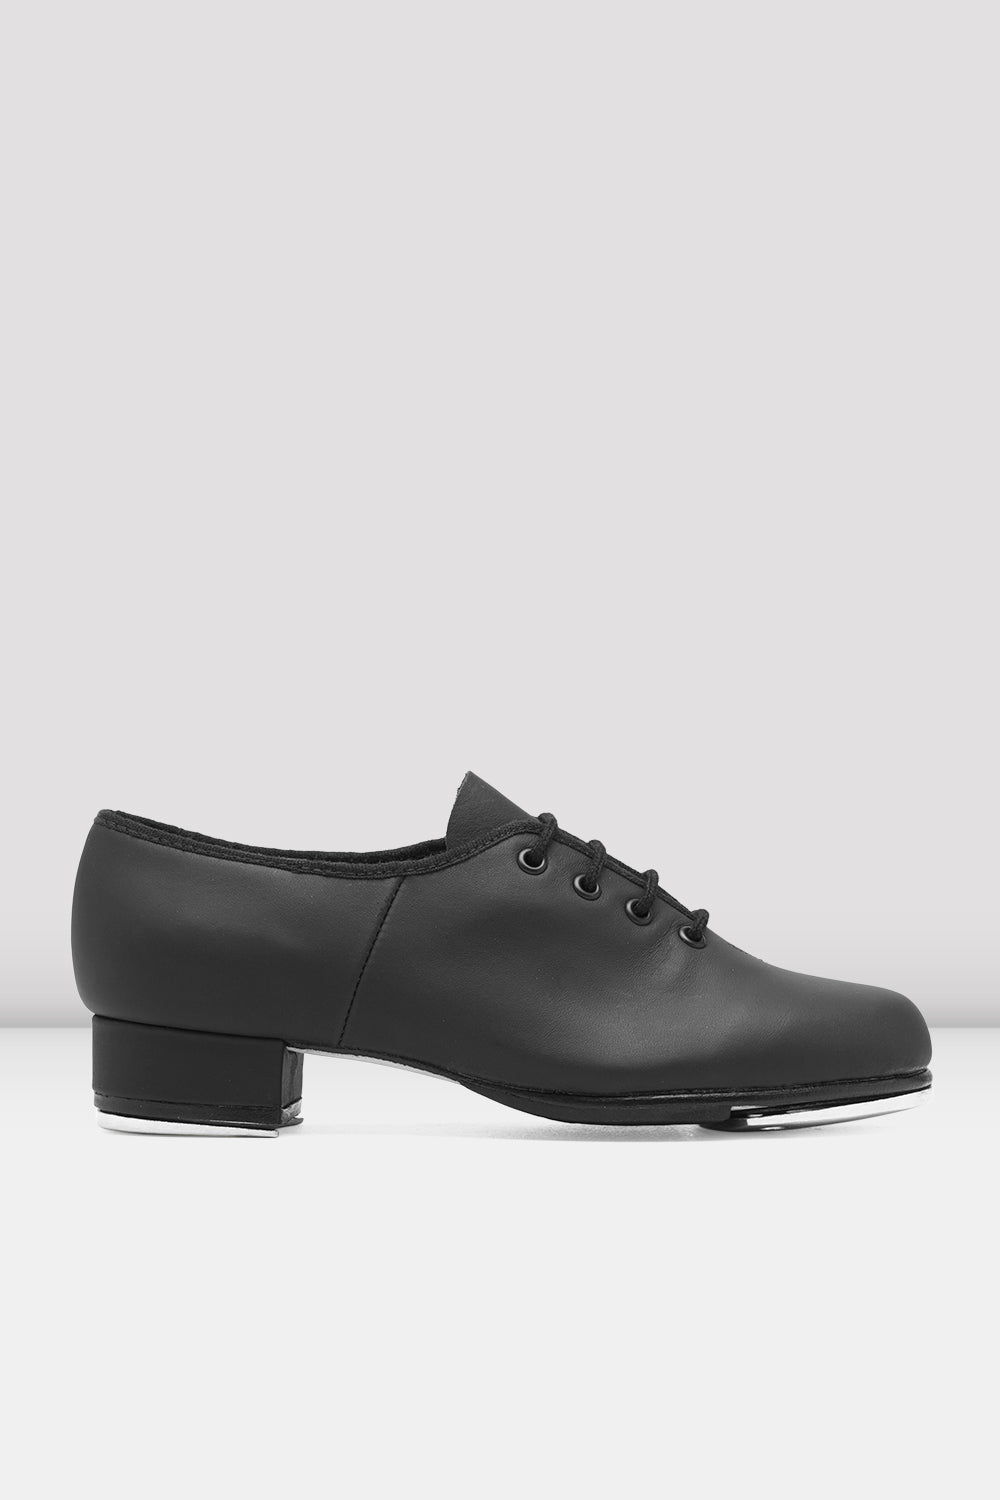 BLOCH Ladies Jazz Tap Leather Tap Shoes, Black Leather